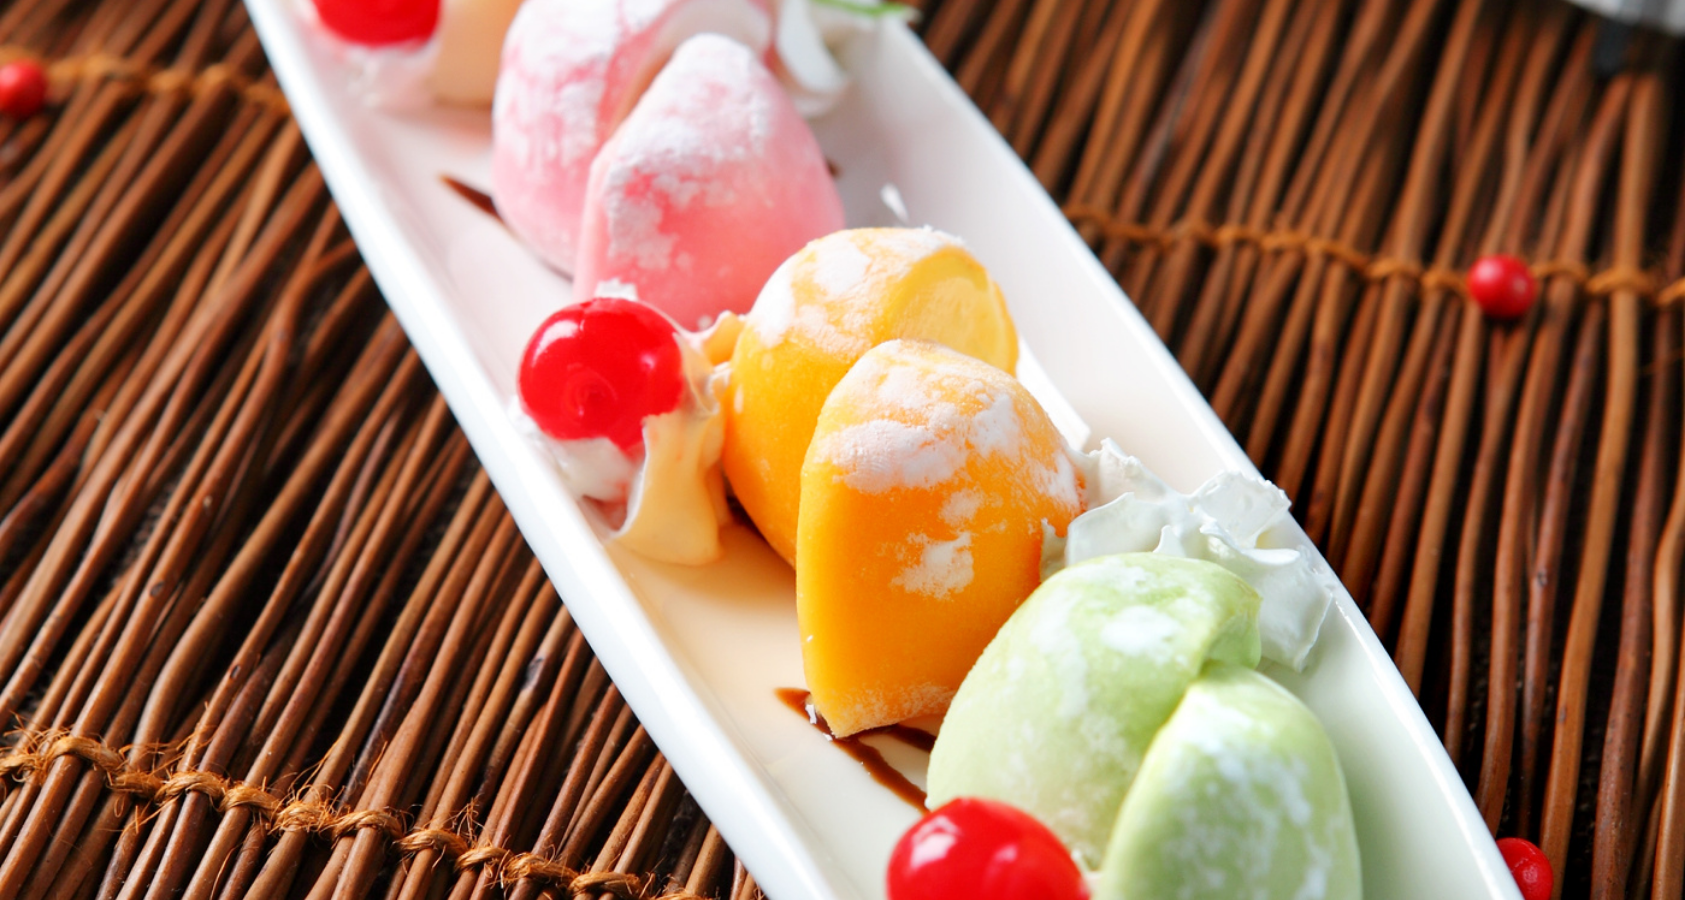 Can Dogs Eat Japanese Mochi Ice-Cream?